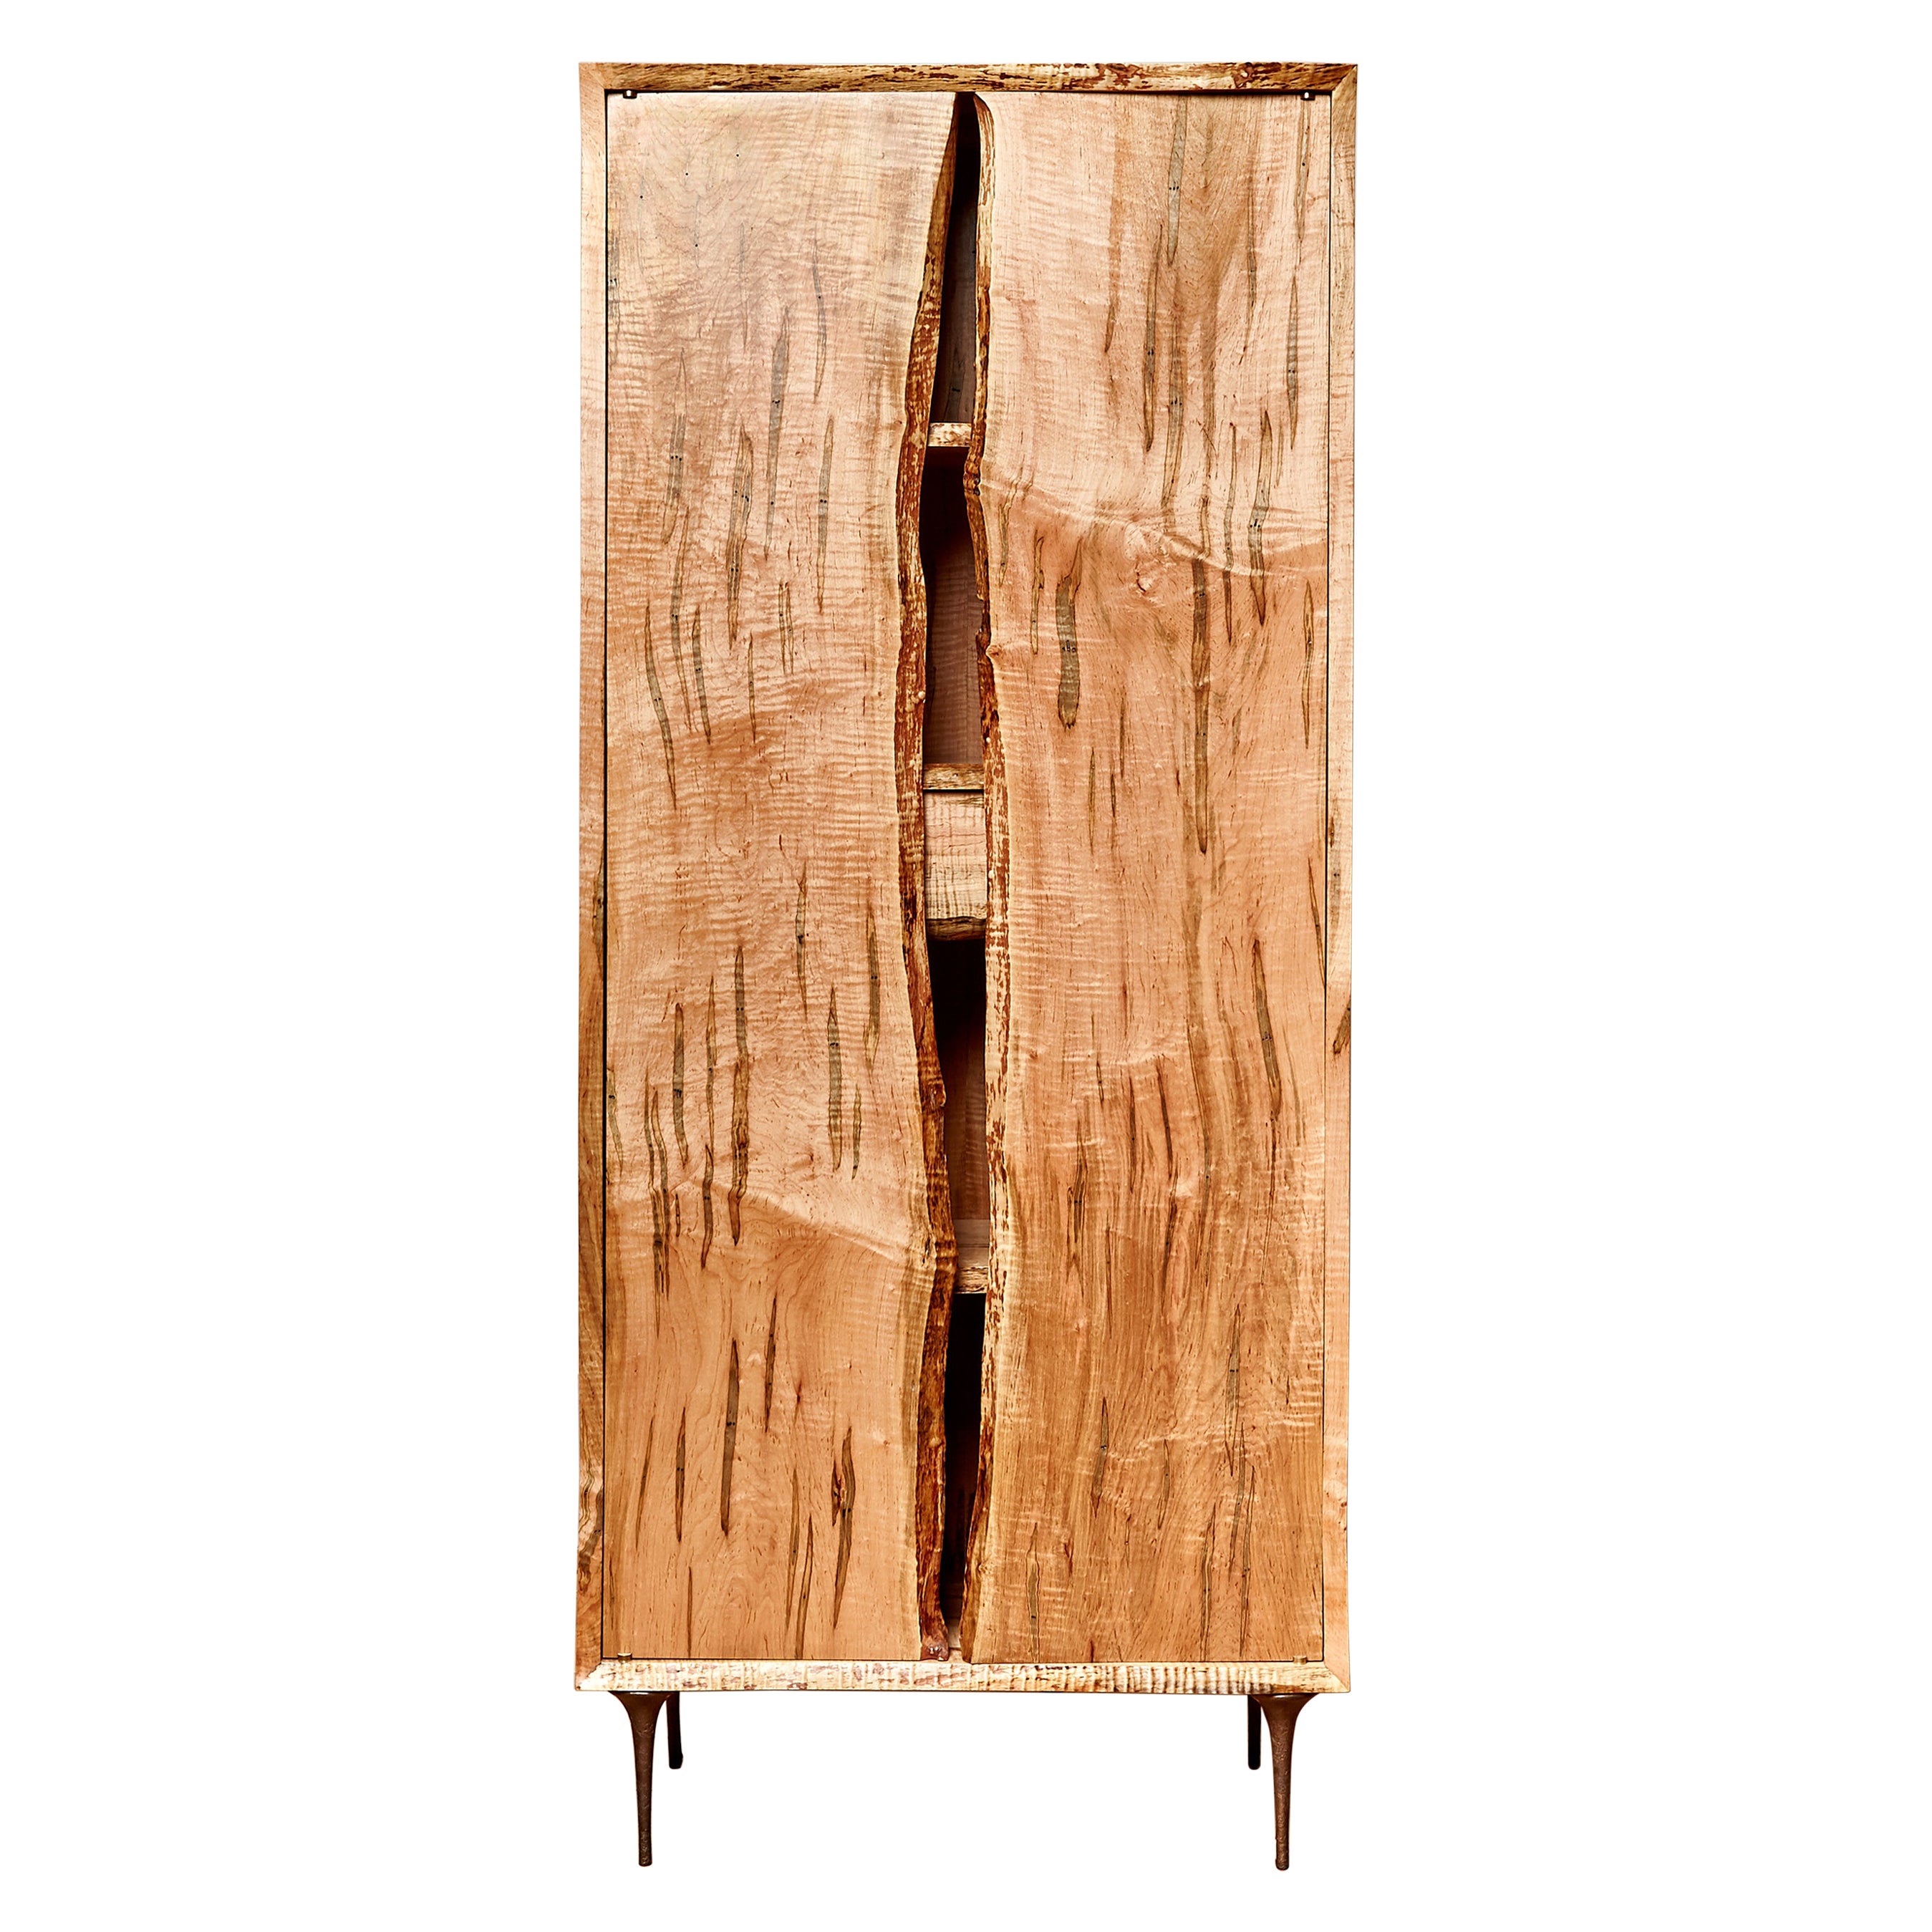 One of a Kind Sculptural Handcrafted Live Edge Ambrosia Maple Tall Cabinet